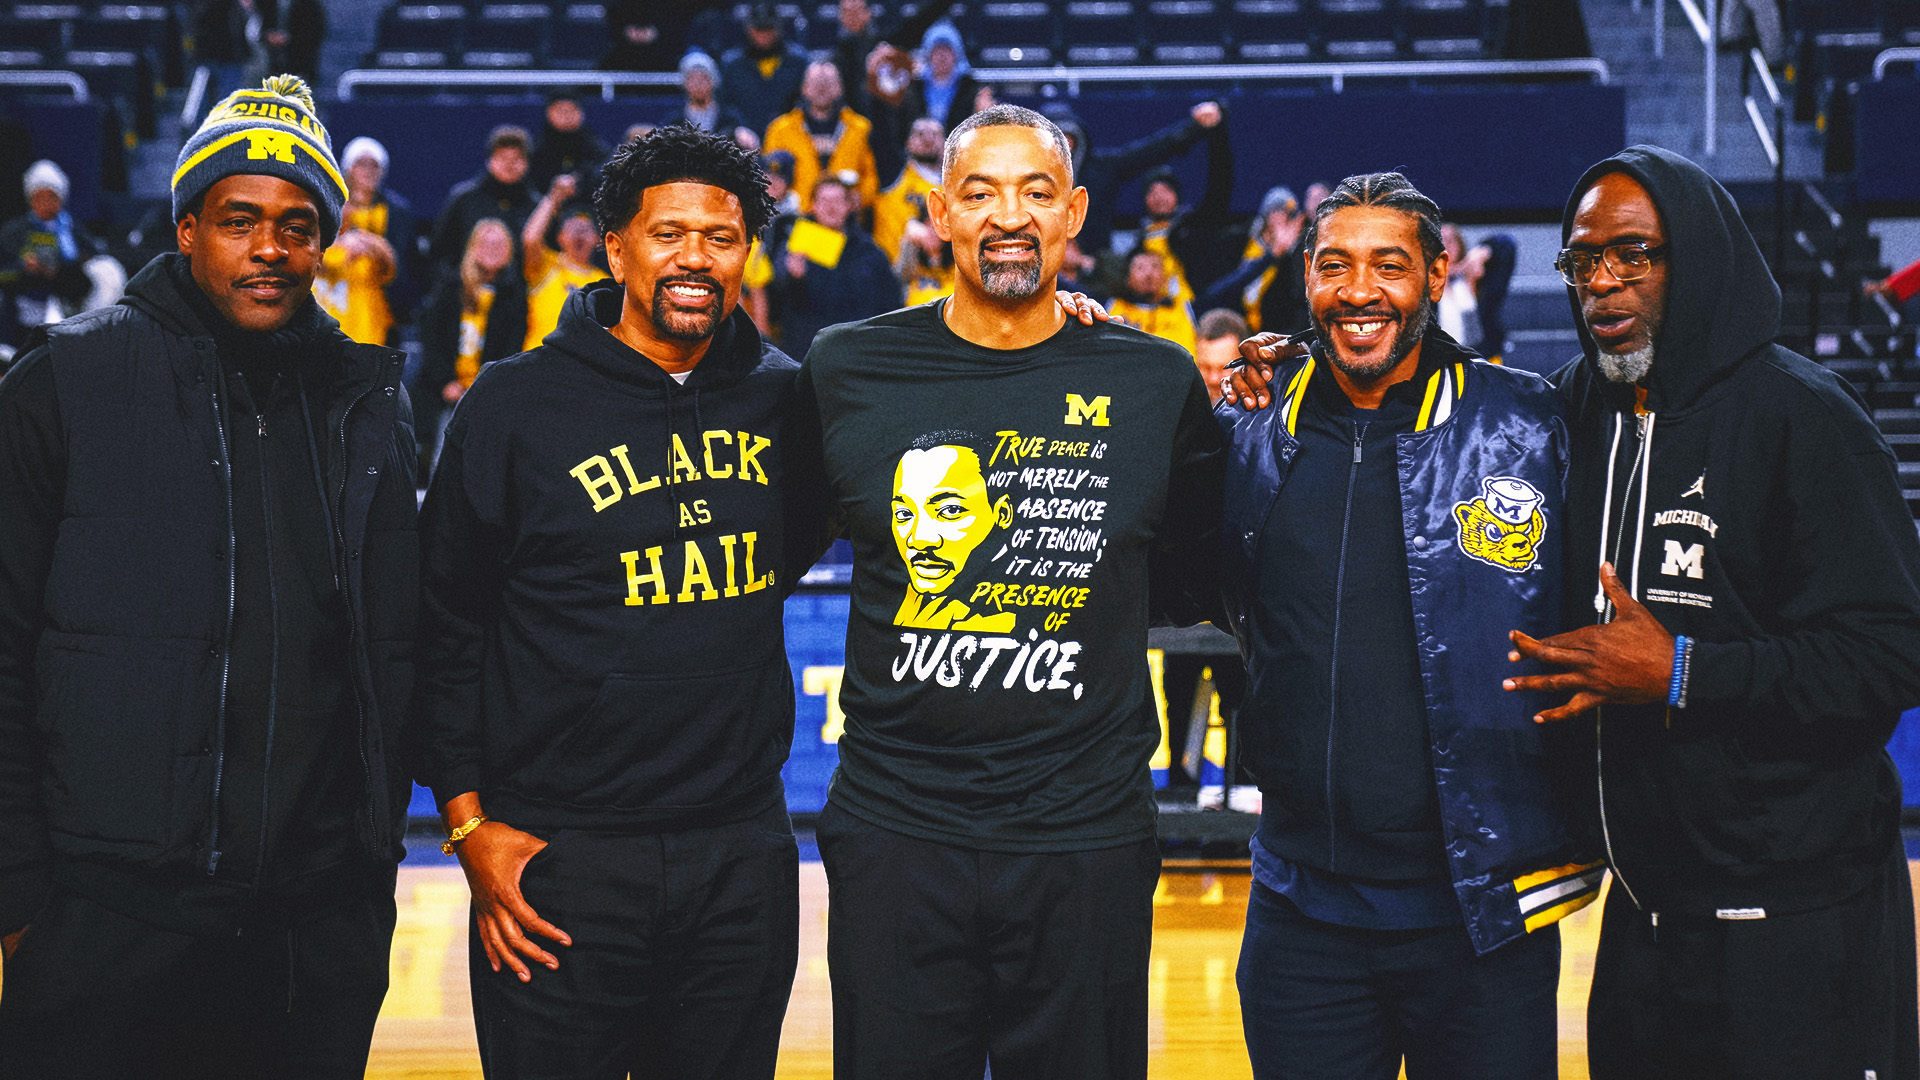 Michigan beats Ohio State, 73-65, in front of Fab Five as reunion goes viral